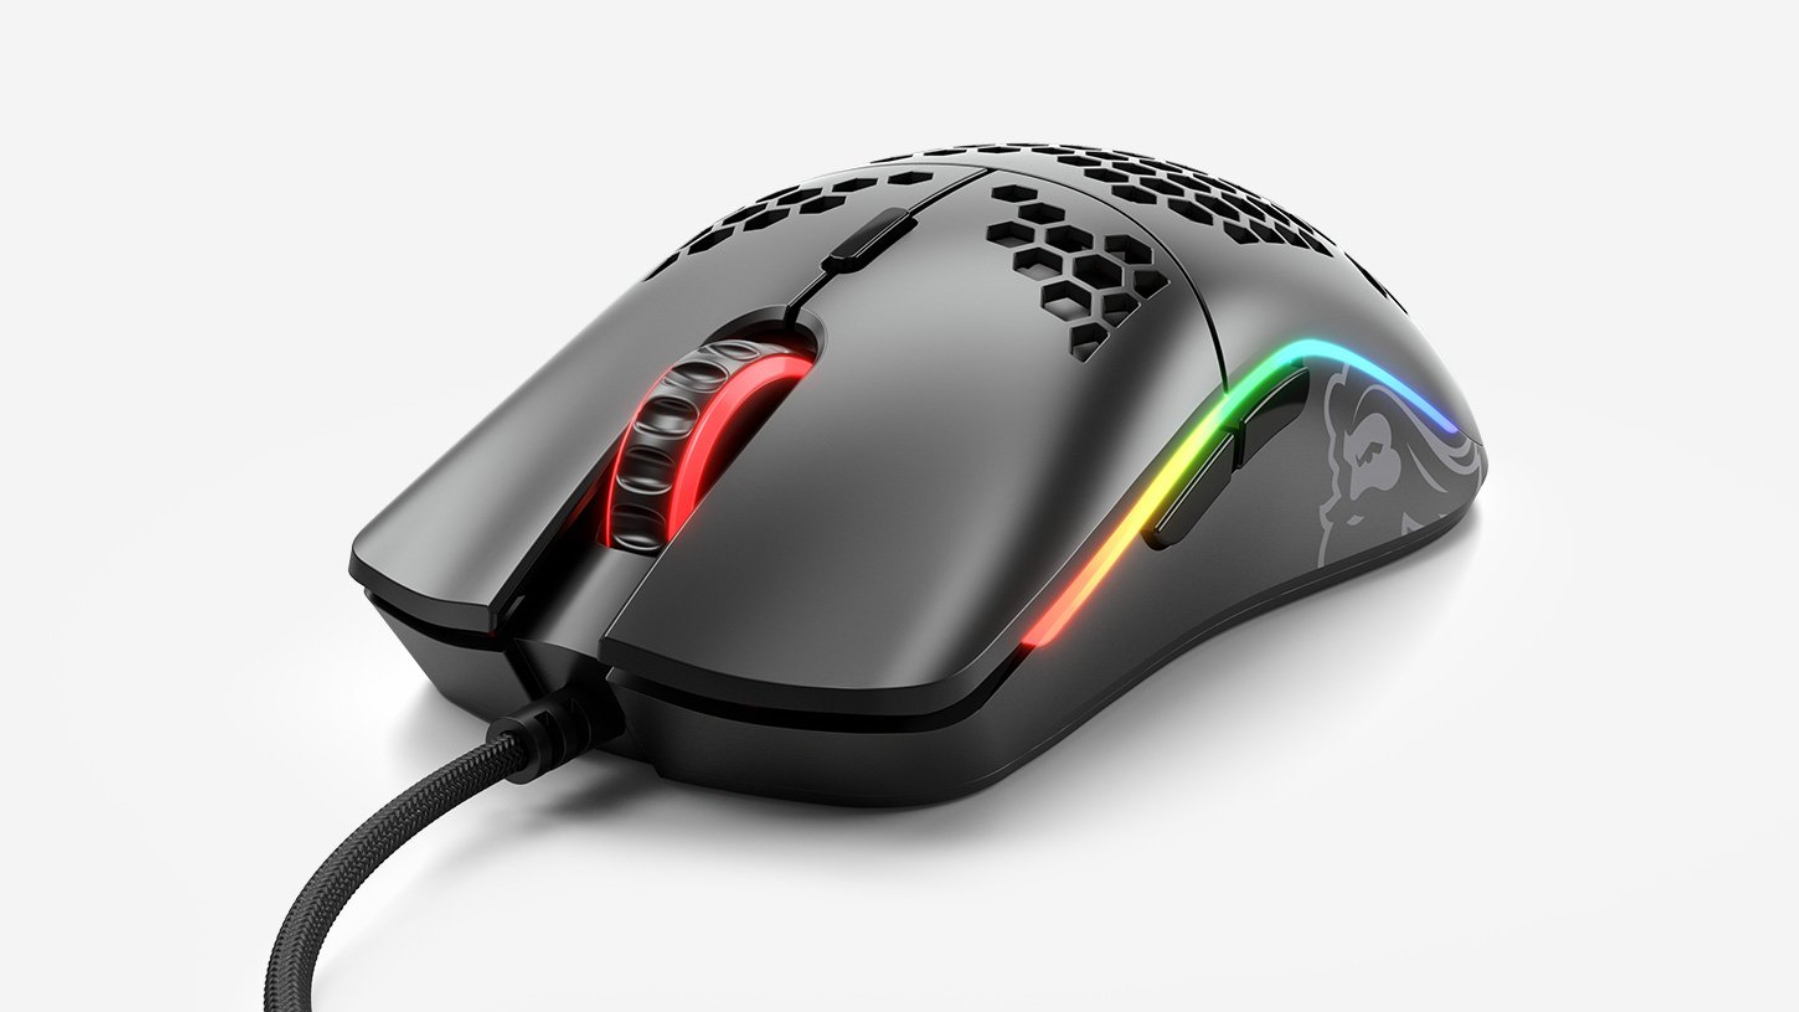 Glorious Model O Minus Gaming Mouse Review: Price Perfect